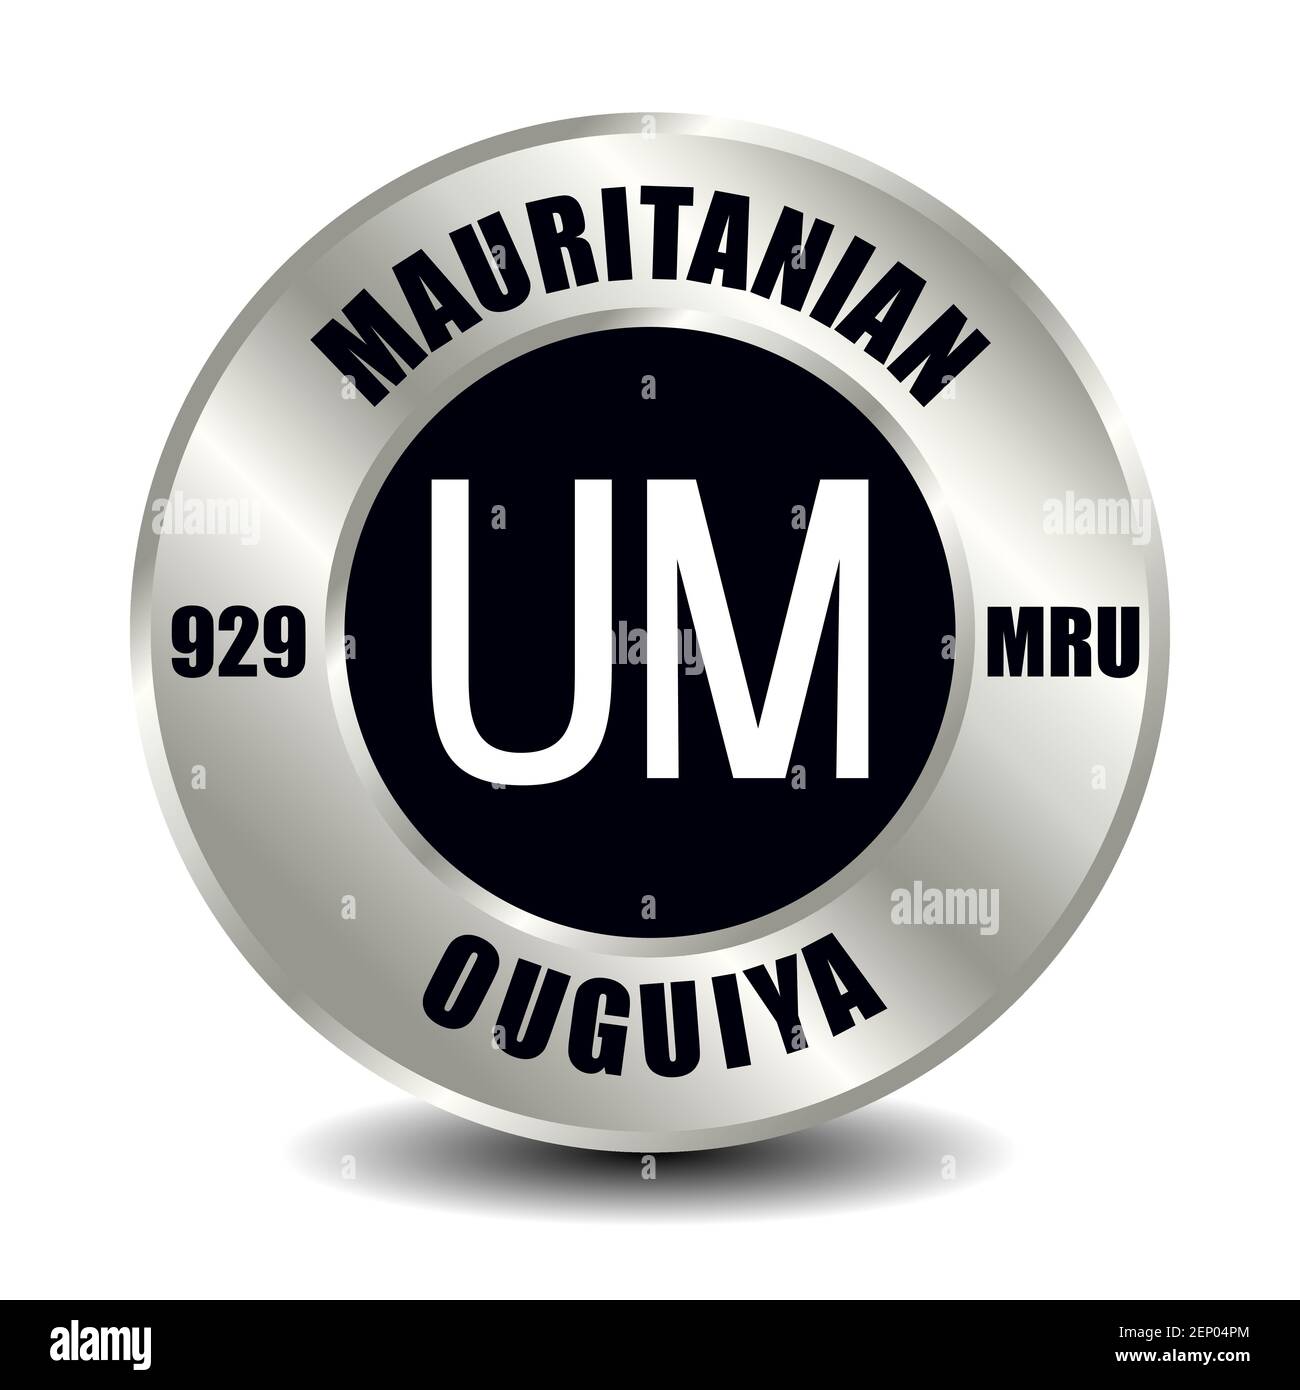 Mauritania money icon isolated on round silver coin. Vector sign of currency symbol with international ISO code and abbreviation Stock Vector